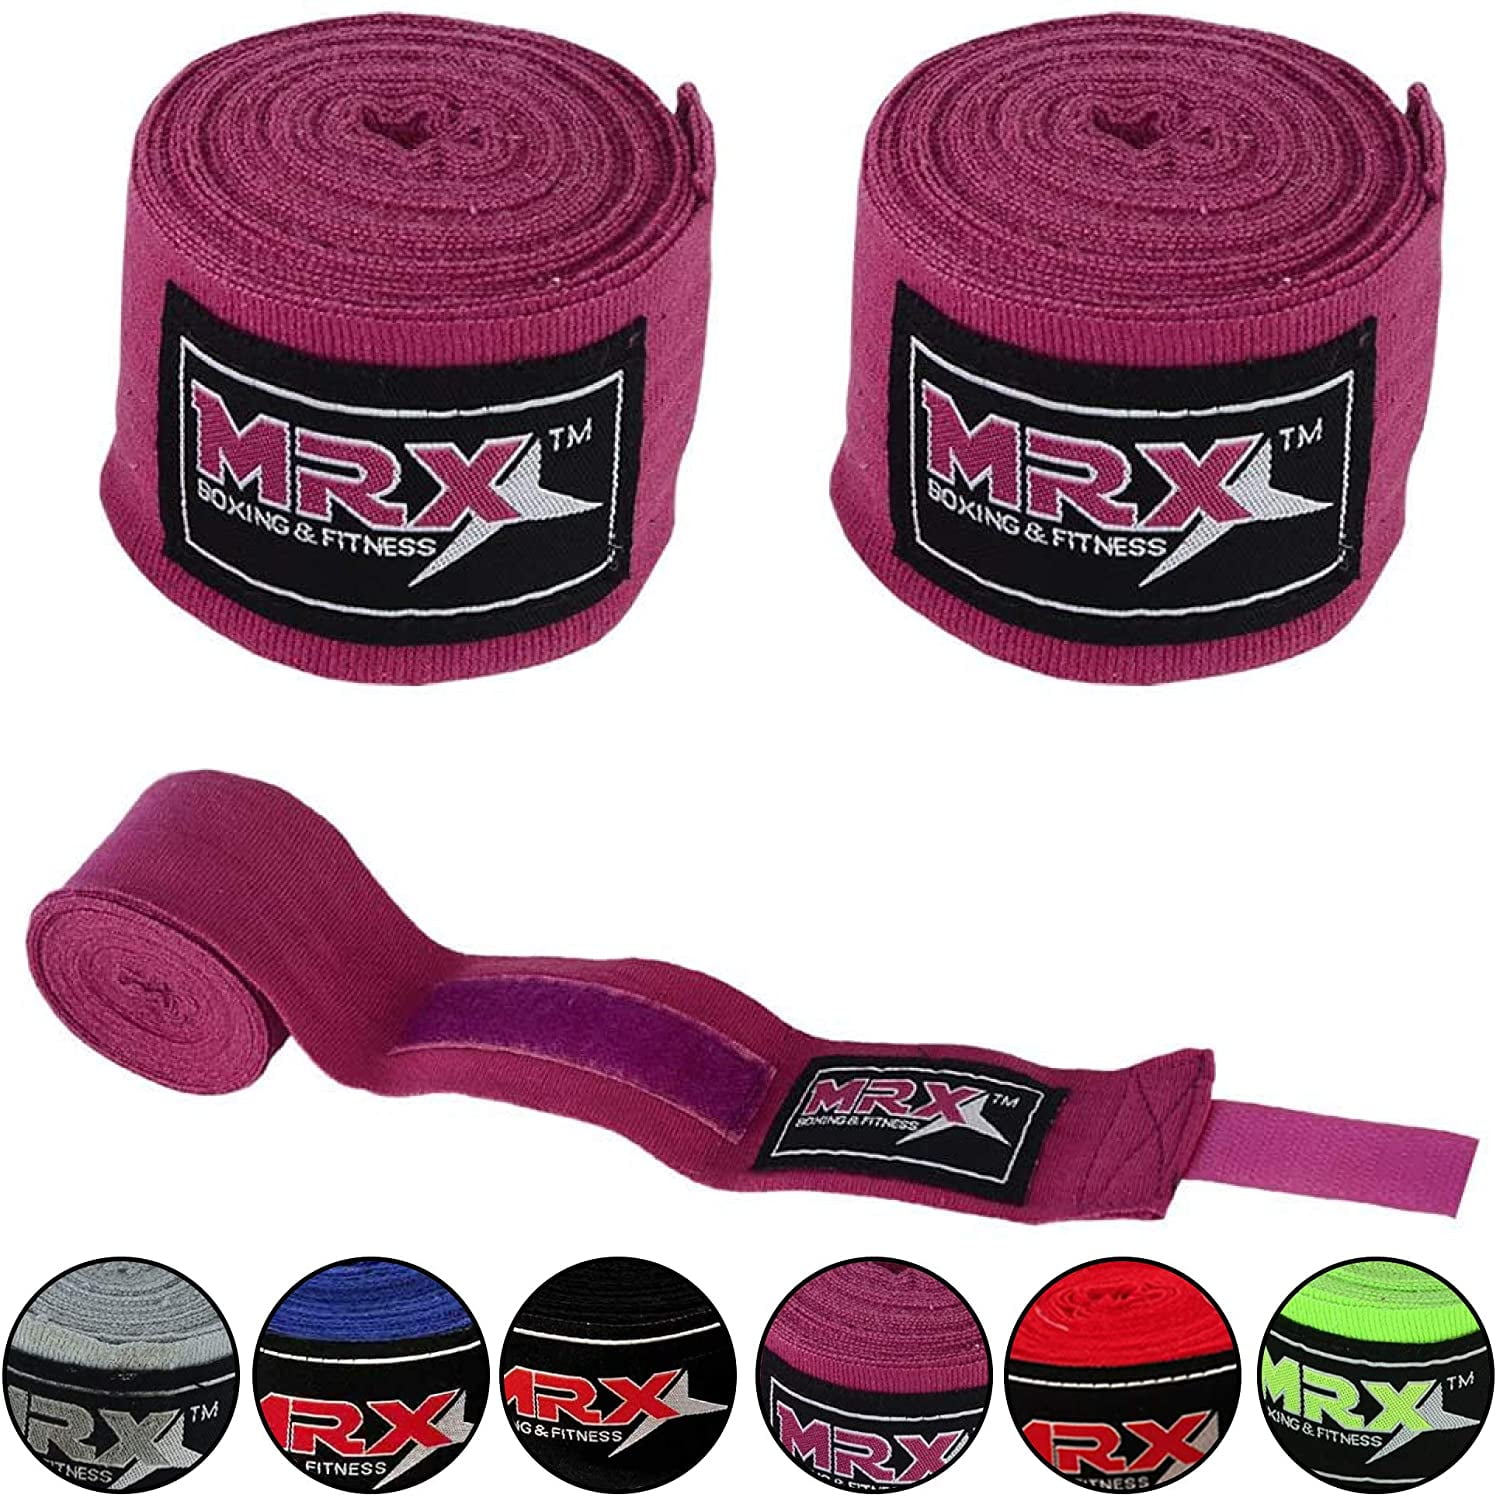 Details about   Boxing Inner Gel Gloves MMA Muay Thai Training Grips Bandages Quick Wrist Wraps 